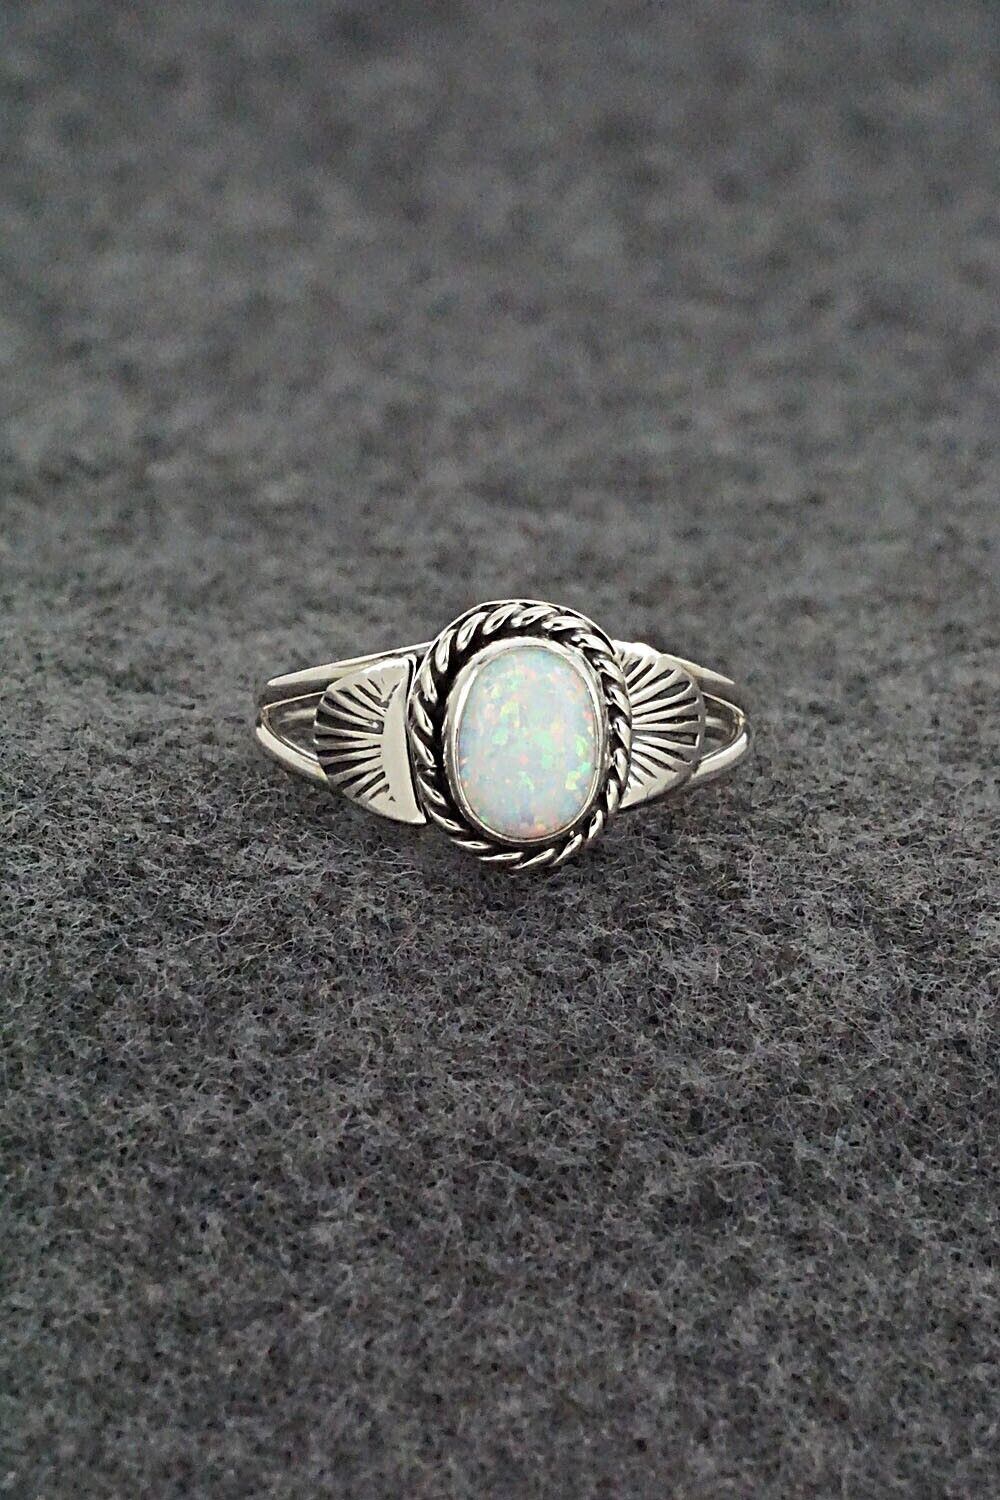 Opalite & Sterling Silver Ring - Jan Mariano - Size 7.75